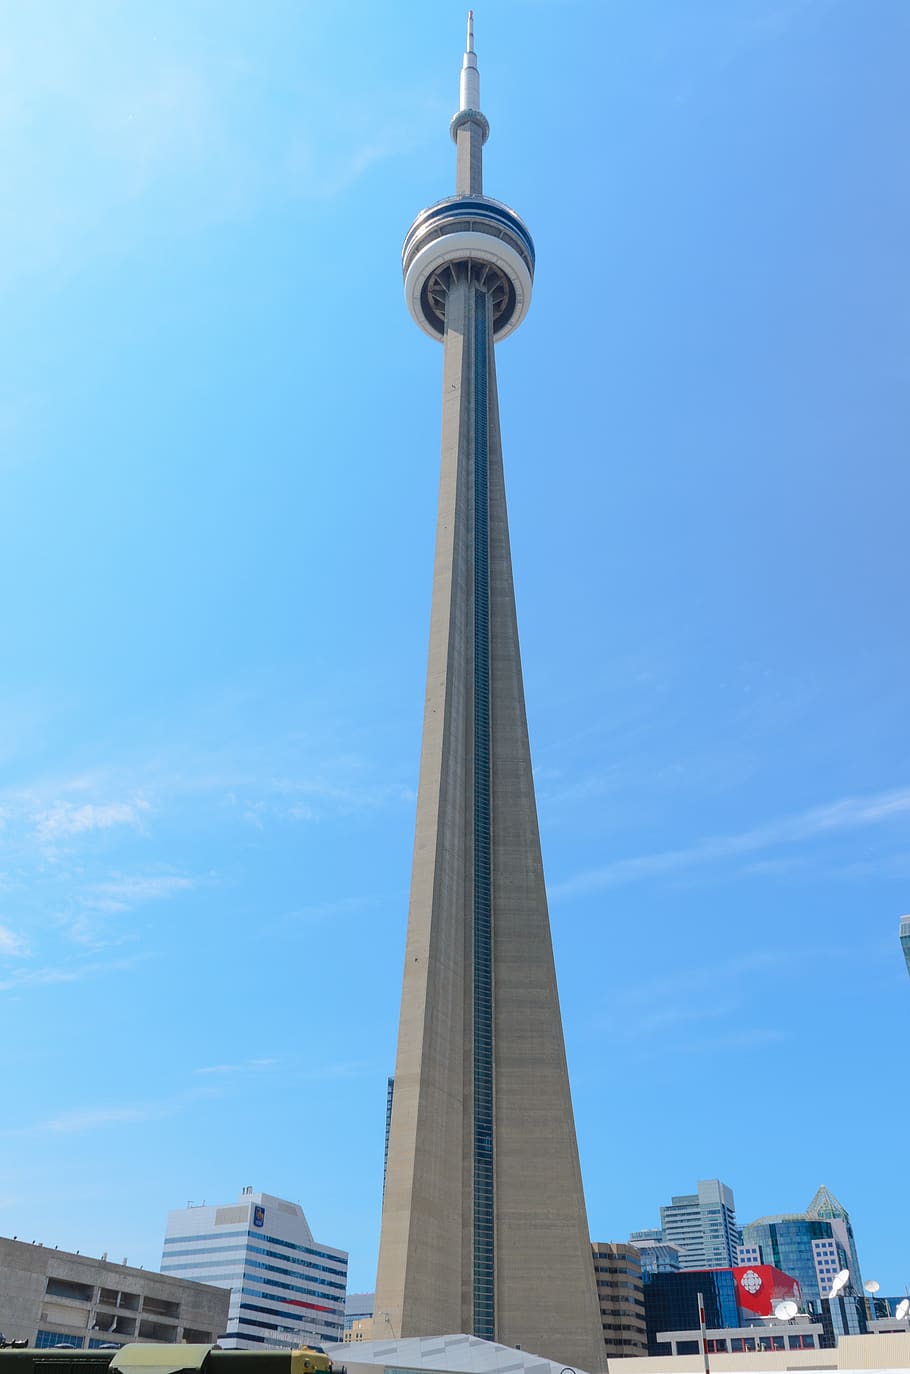 Gray Concrete Tower, architecture, blue sky, building, cn tower, HD wallpaper